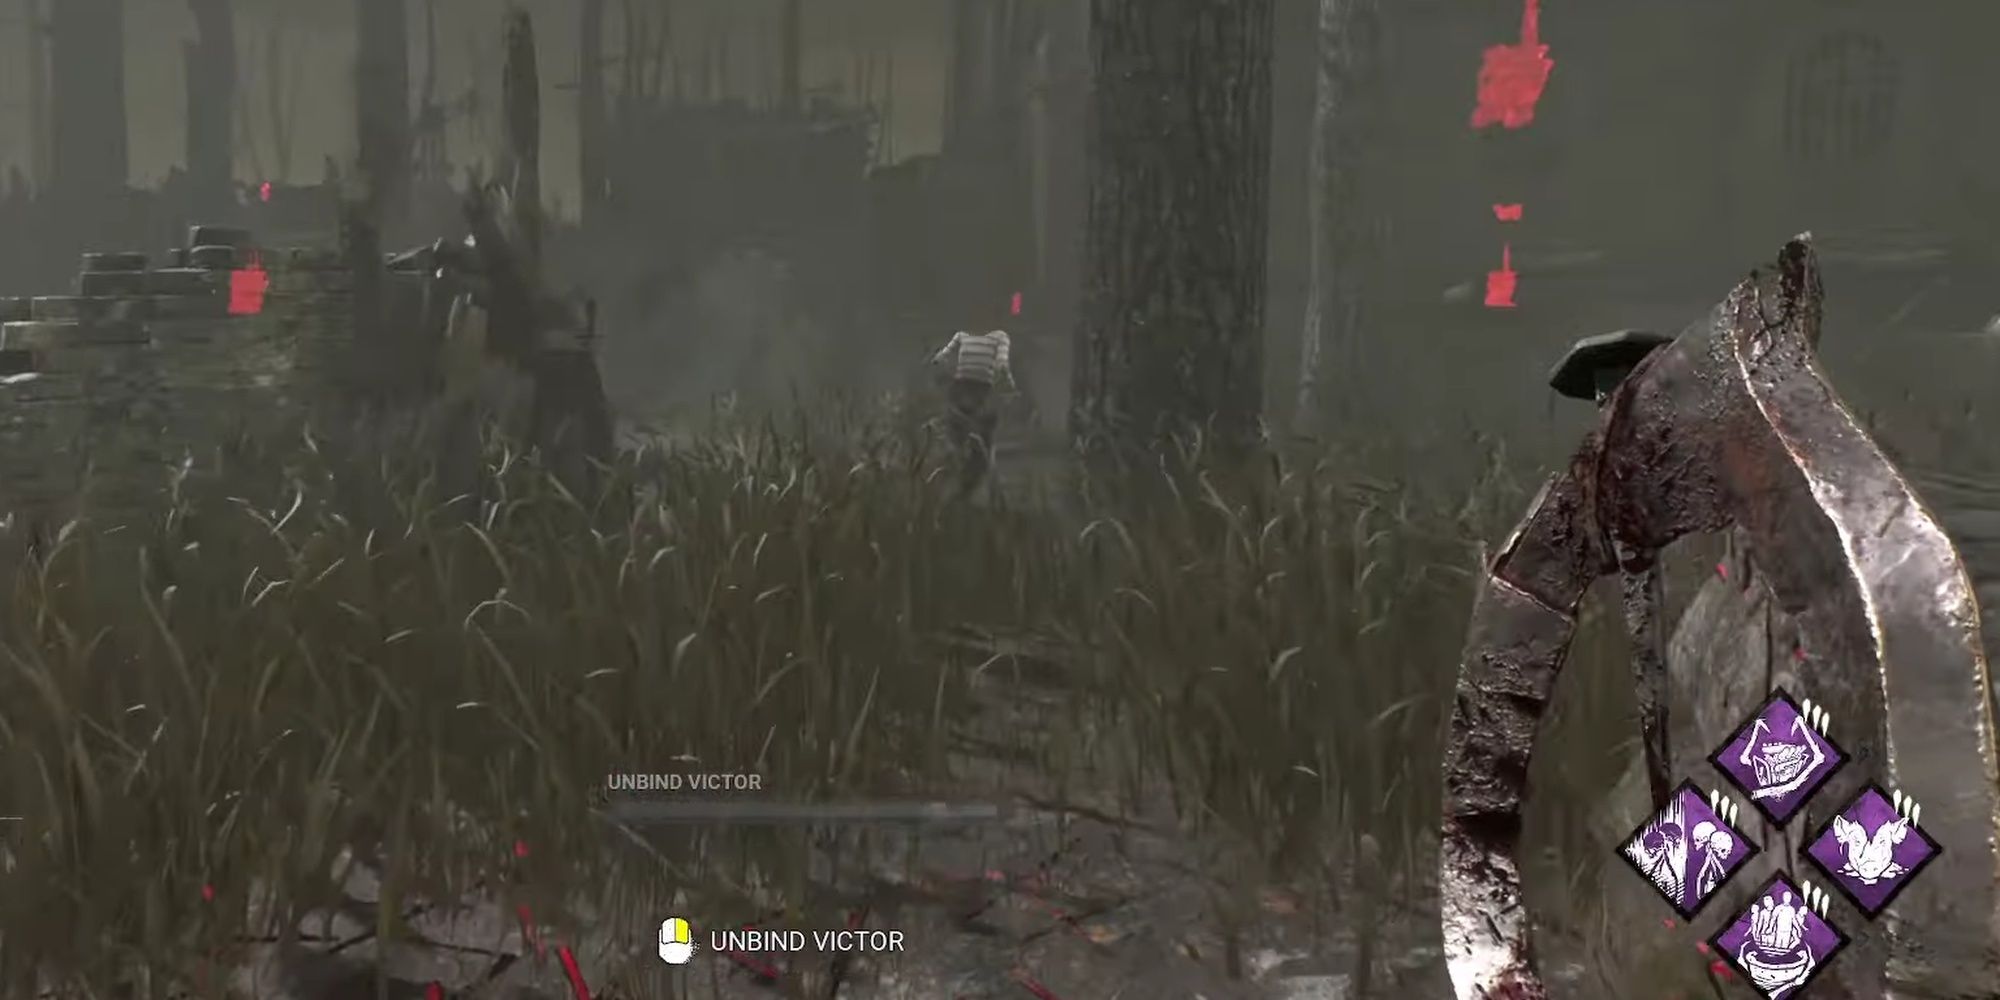 Dead By Daylight: Killer Close To Survivor During Chase